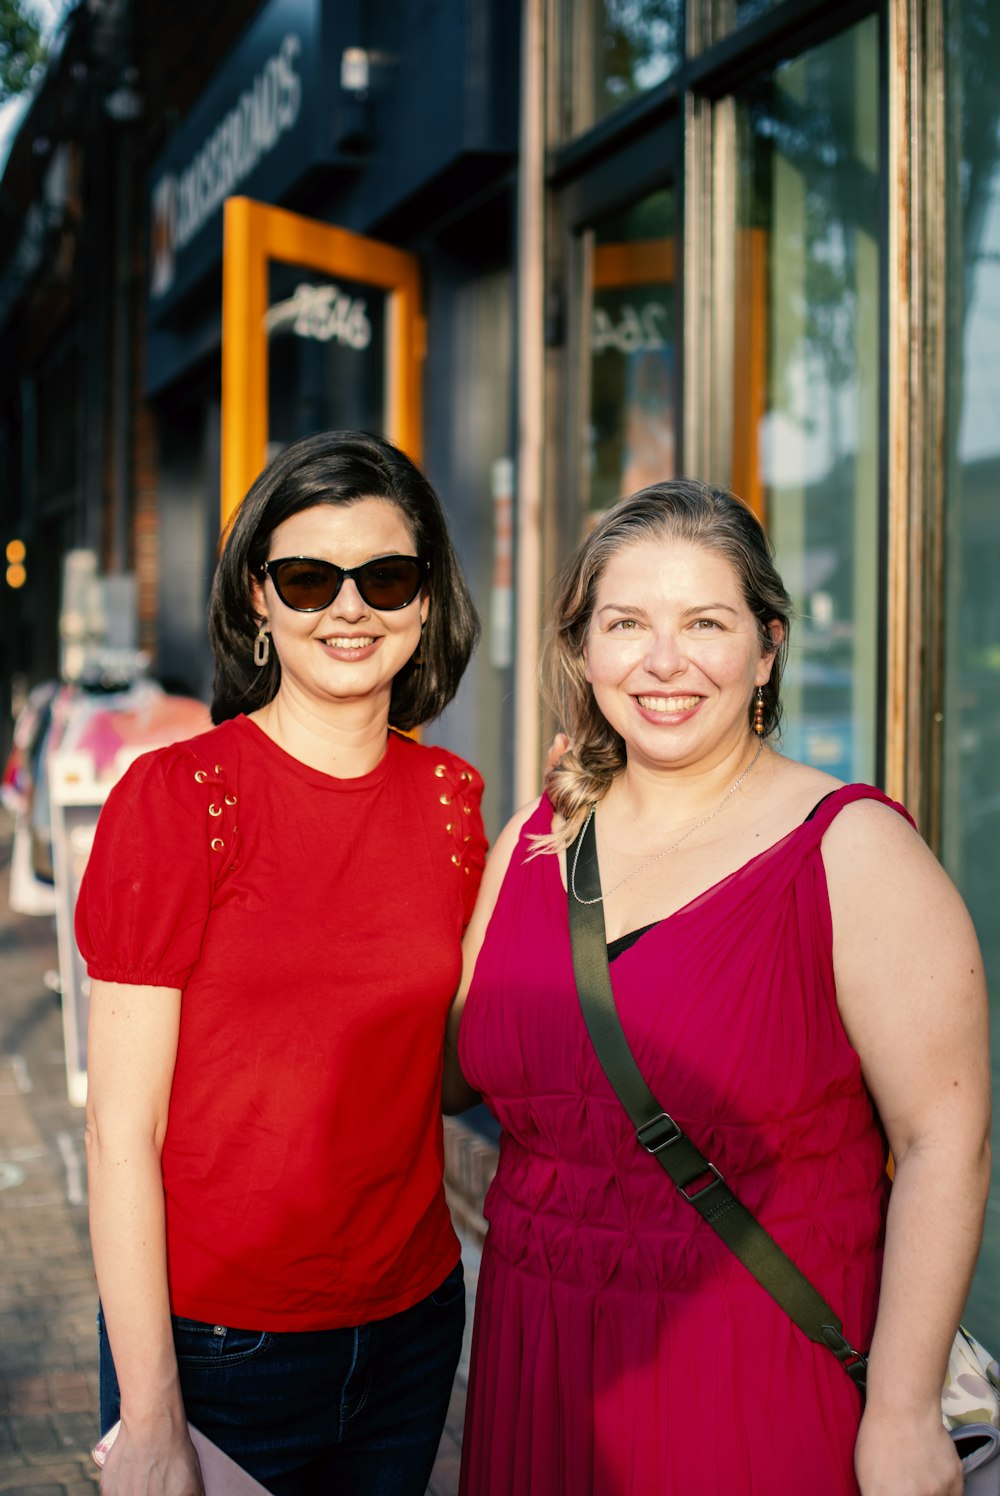 2 women smiling in front of brown wooden framed glass window